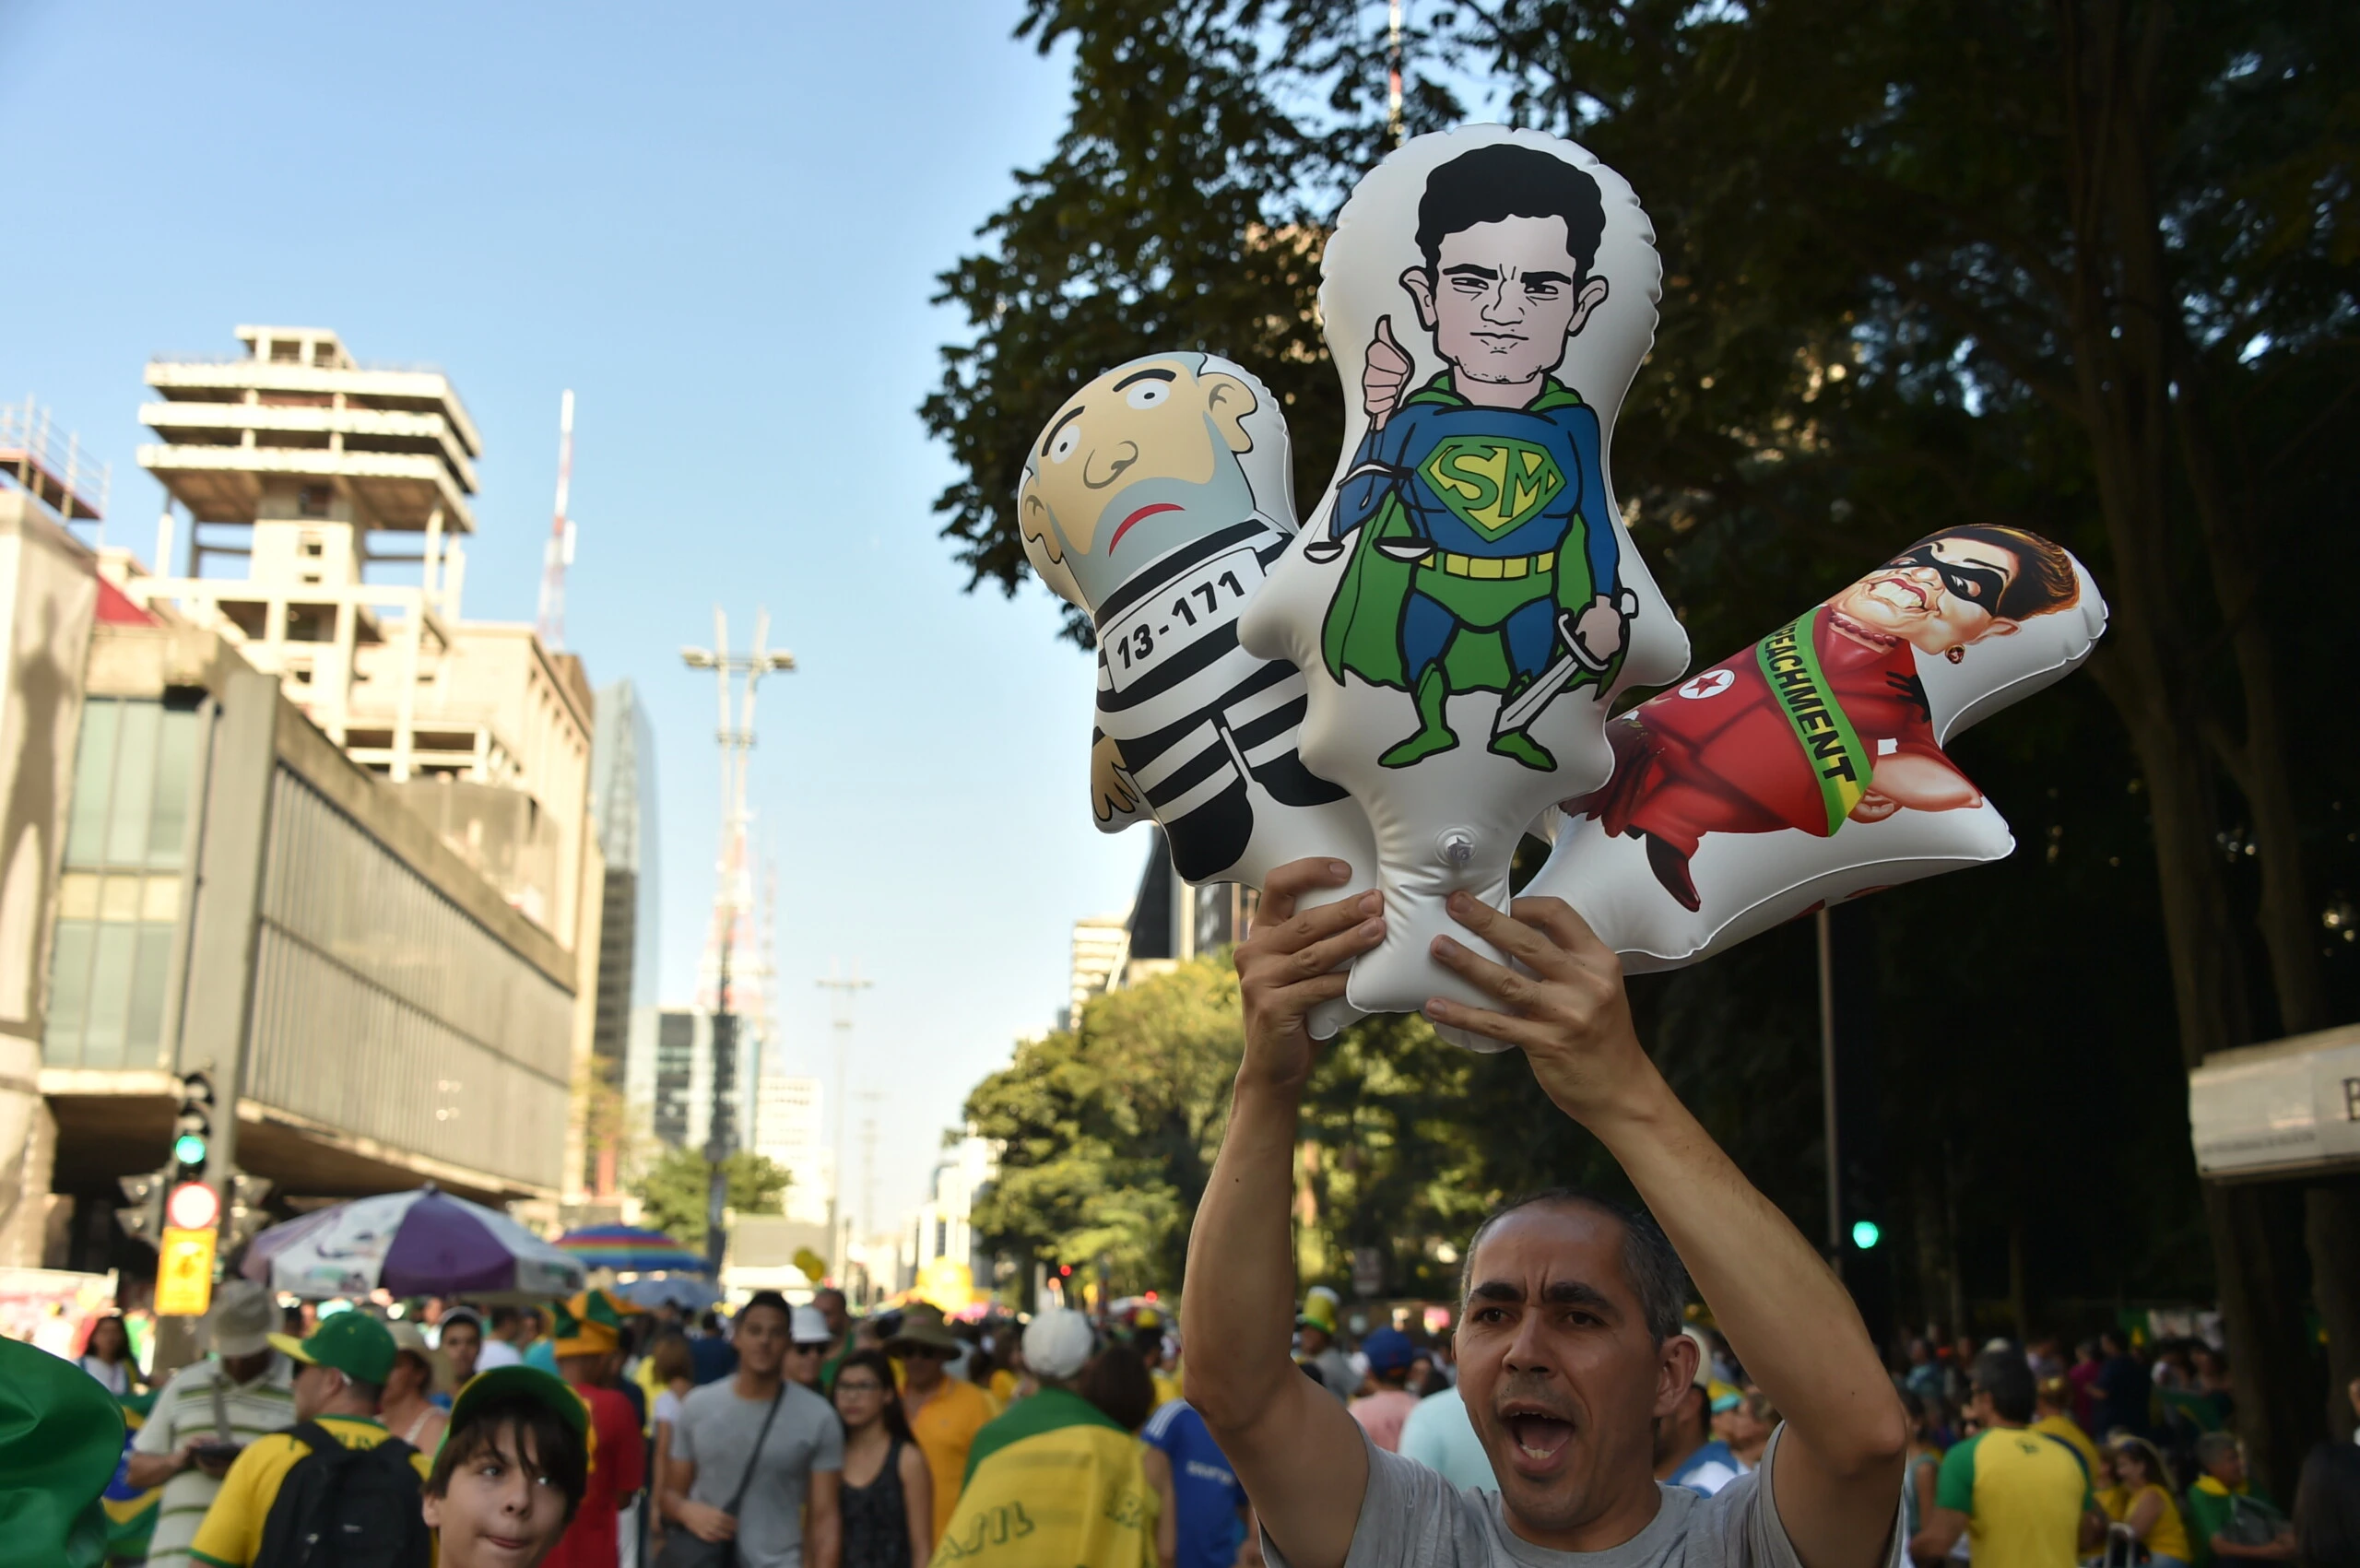 A mand holds balloons depicting (L-R) Brazilian former President Luiz Inacio Lula Da Silva, Brazilian Judge Sergio Moro and Brazilian President Dilma Rousseff during a demo in support of Rousseff's impeachment in Sao Paulo, Brazil on April 17, 2016. Rousseff risks being driven from office if the lower house votes in favor of an impeachment trial Sunday in Brasilia. / AFP / NELSON ALMEIDA        (Photo credit should read NELSON ALMEIDA/AFP/Getty Images)